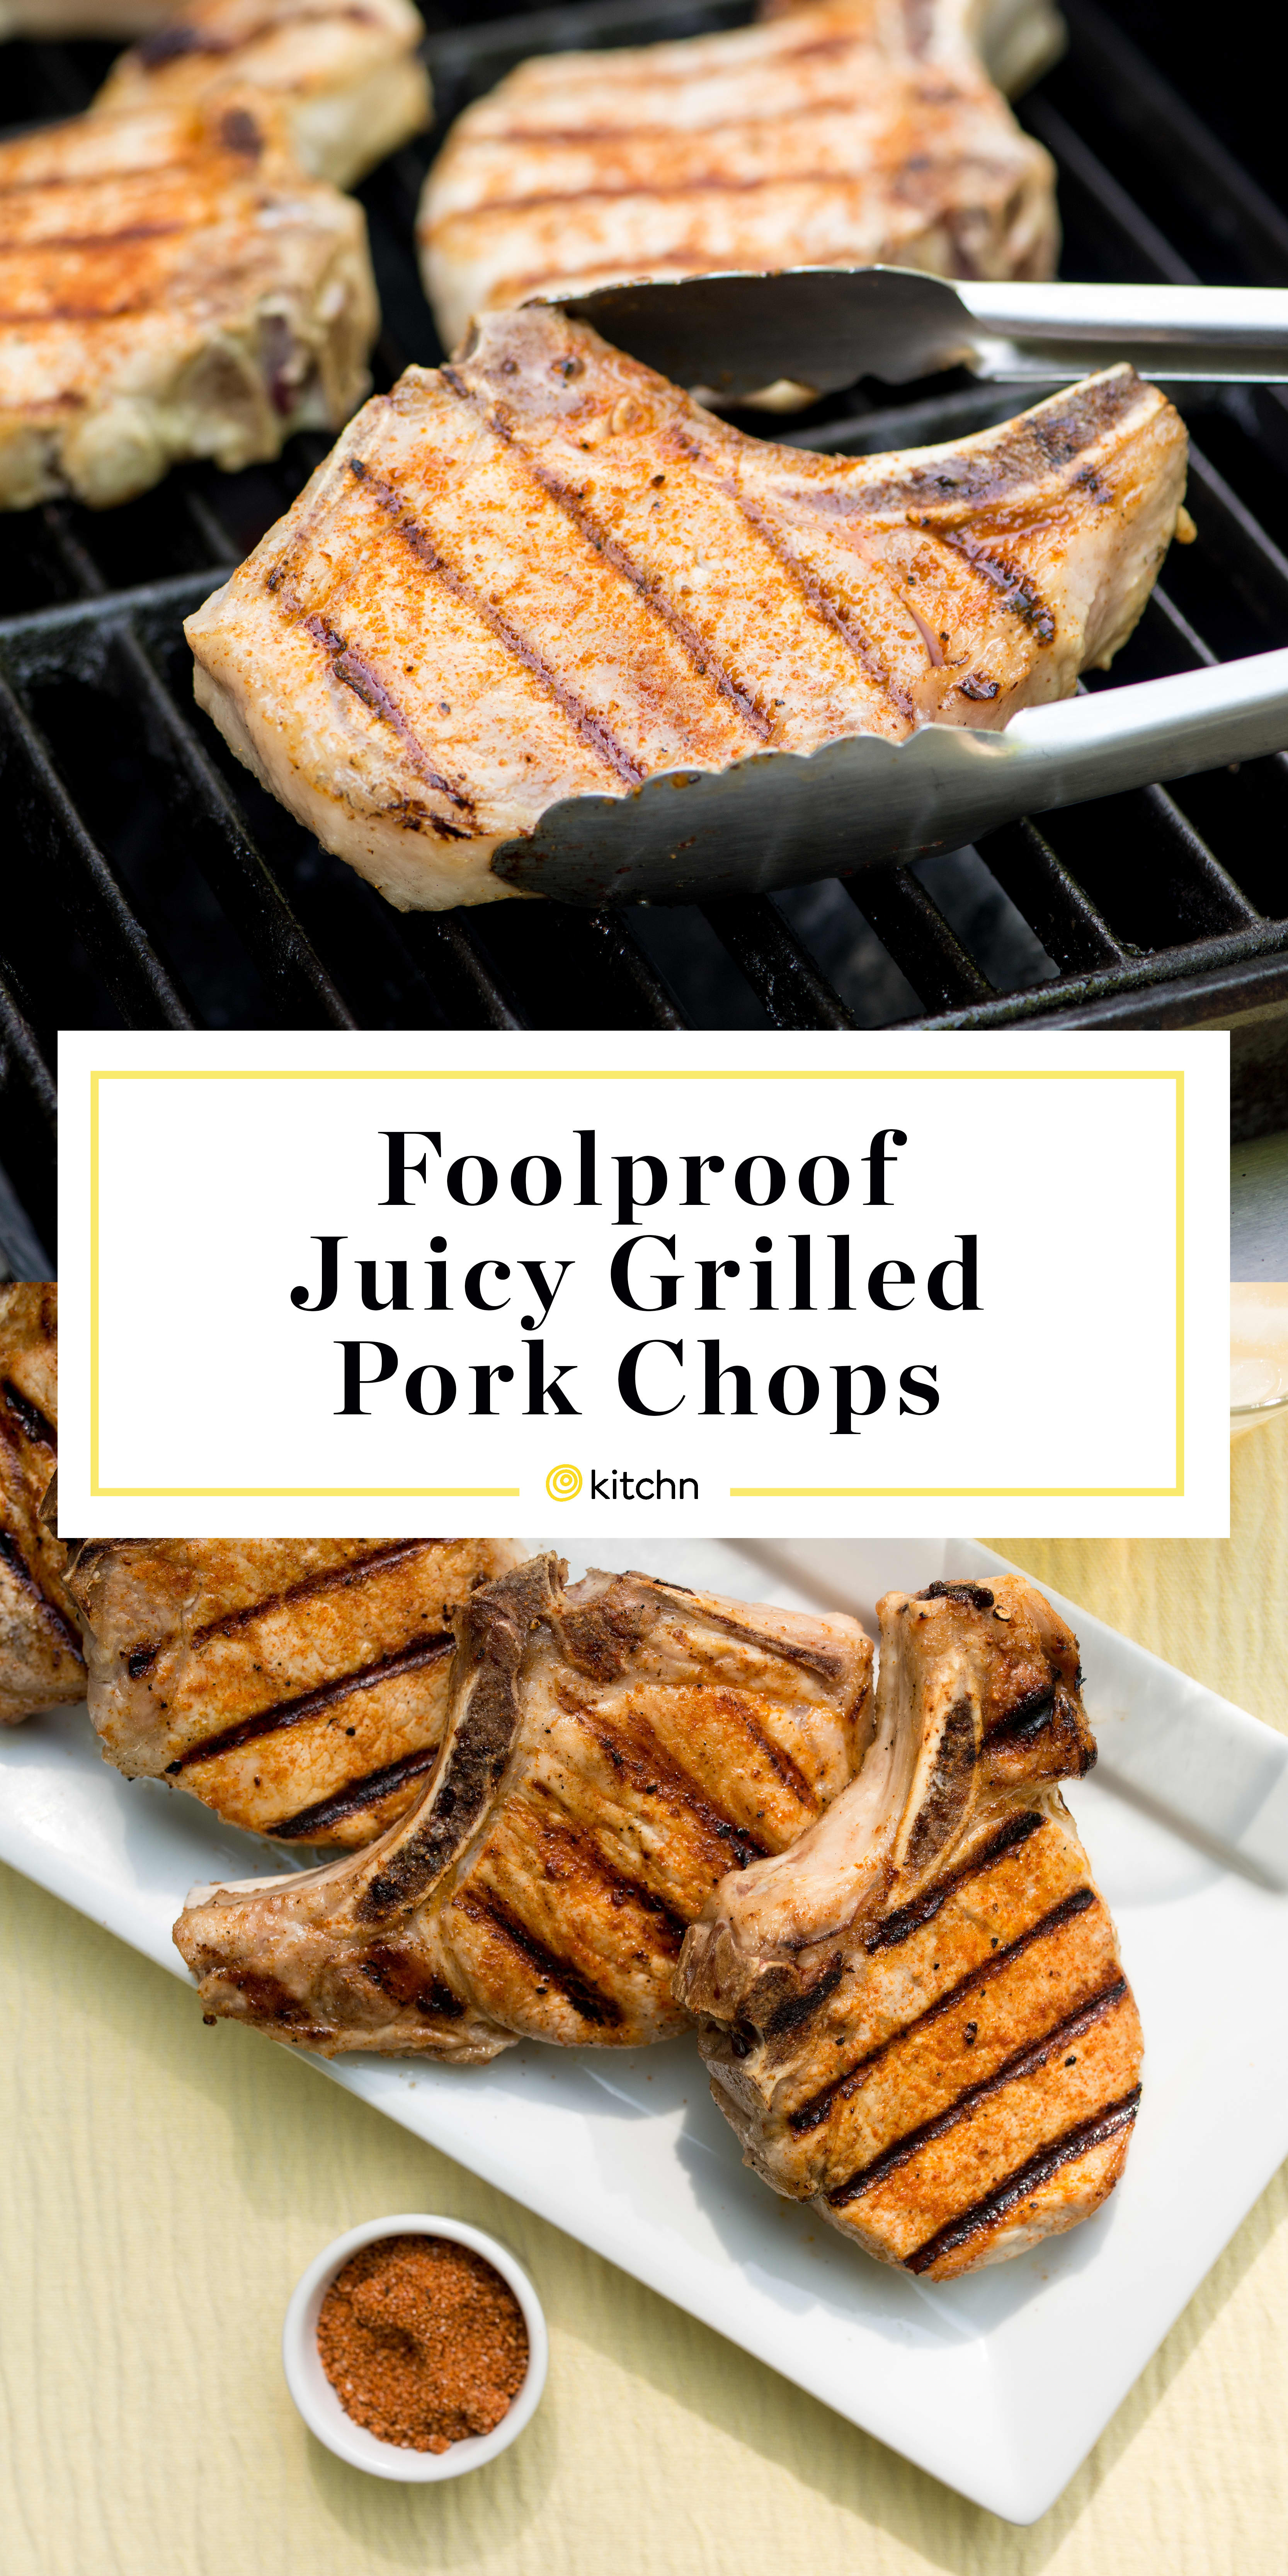 How To Grill Pork Chops Kitchn,Best Places To Have A Birthday Party